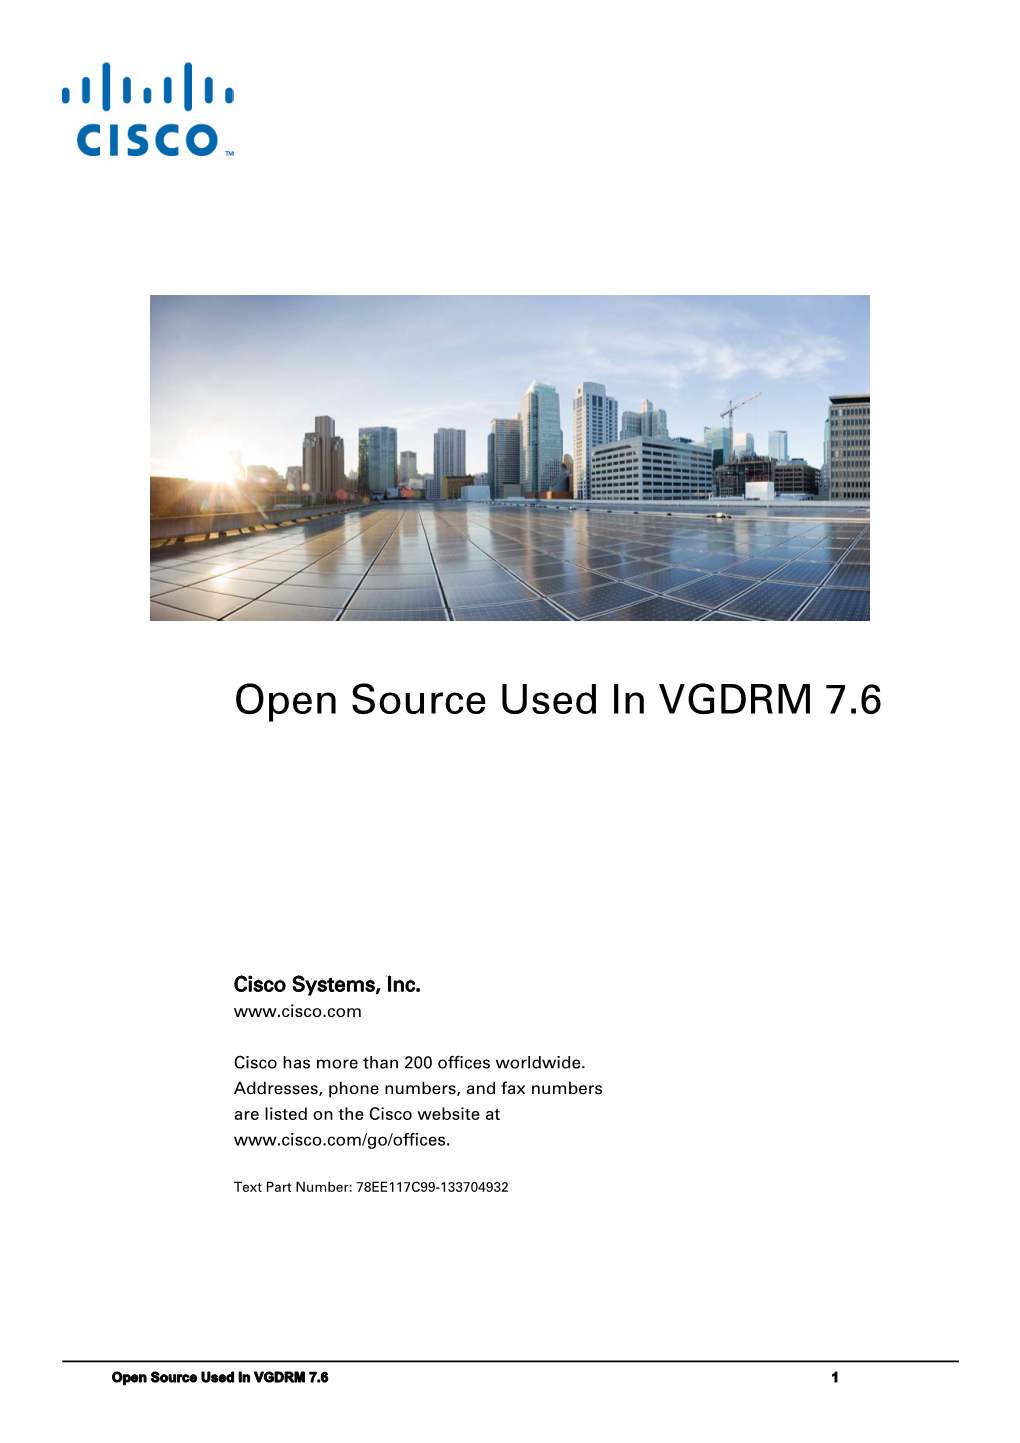 Open Source Used in VGDRM 7.6